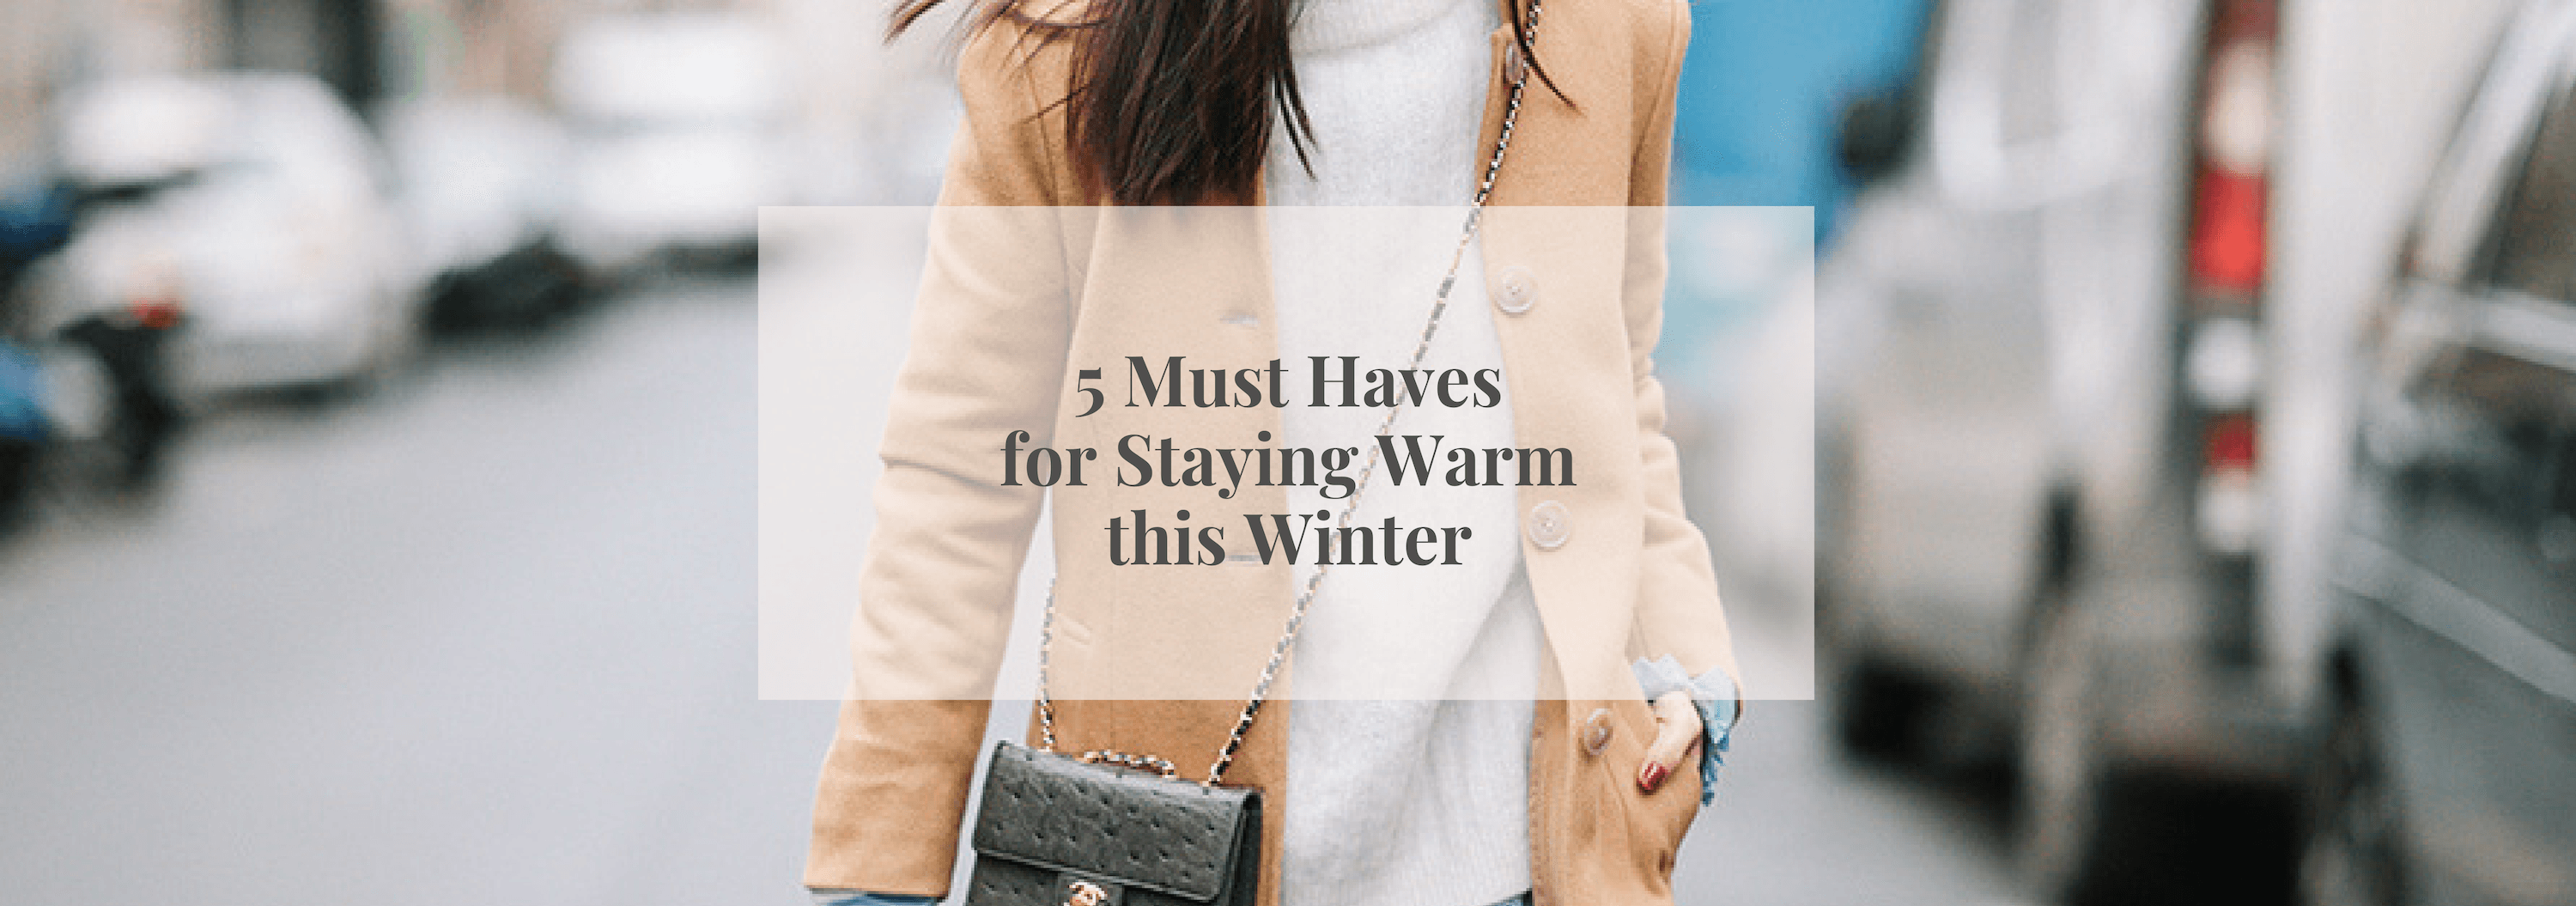 5 Must Haves for Staying Warm This Winter - Numi